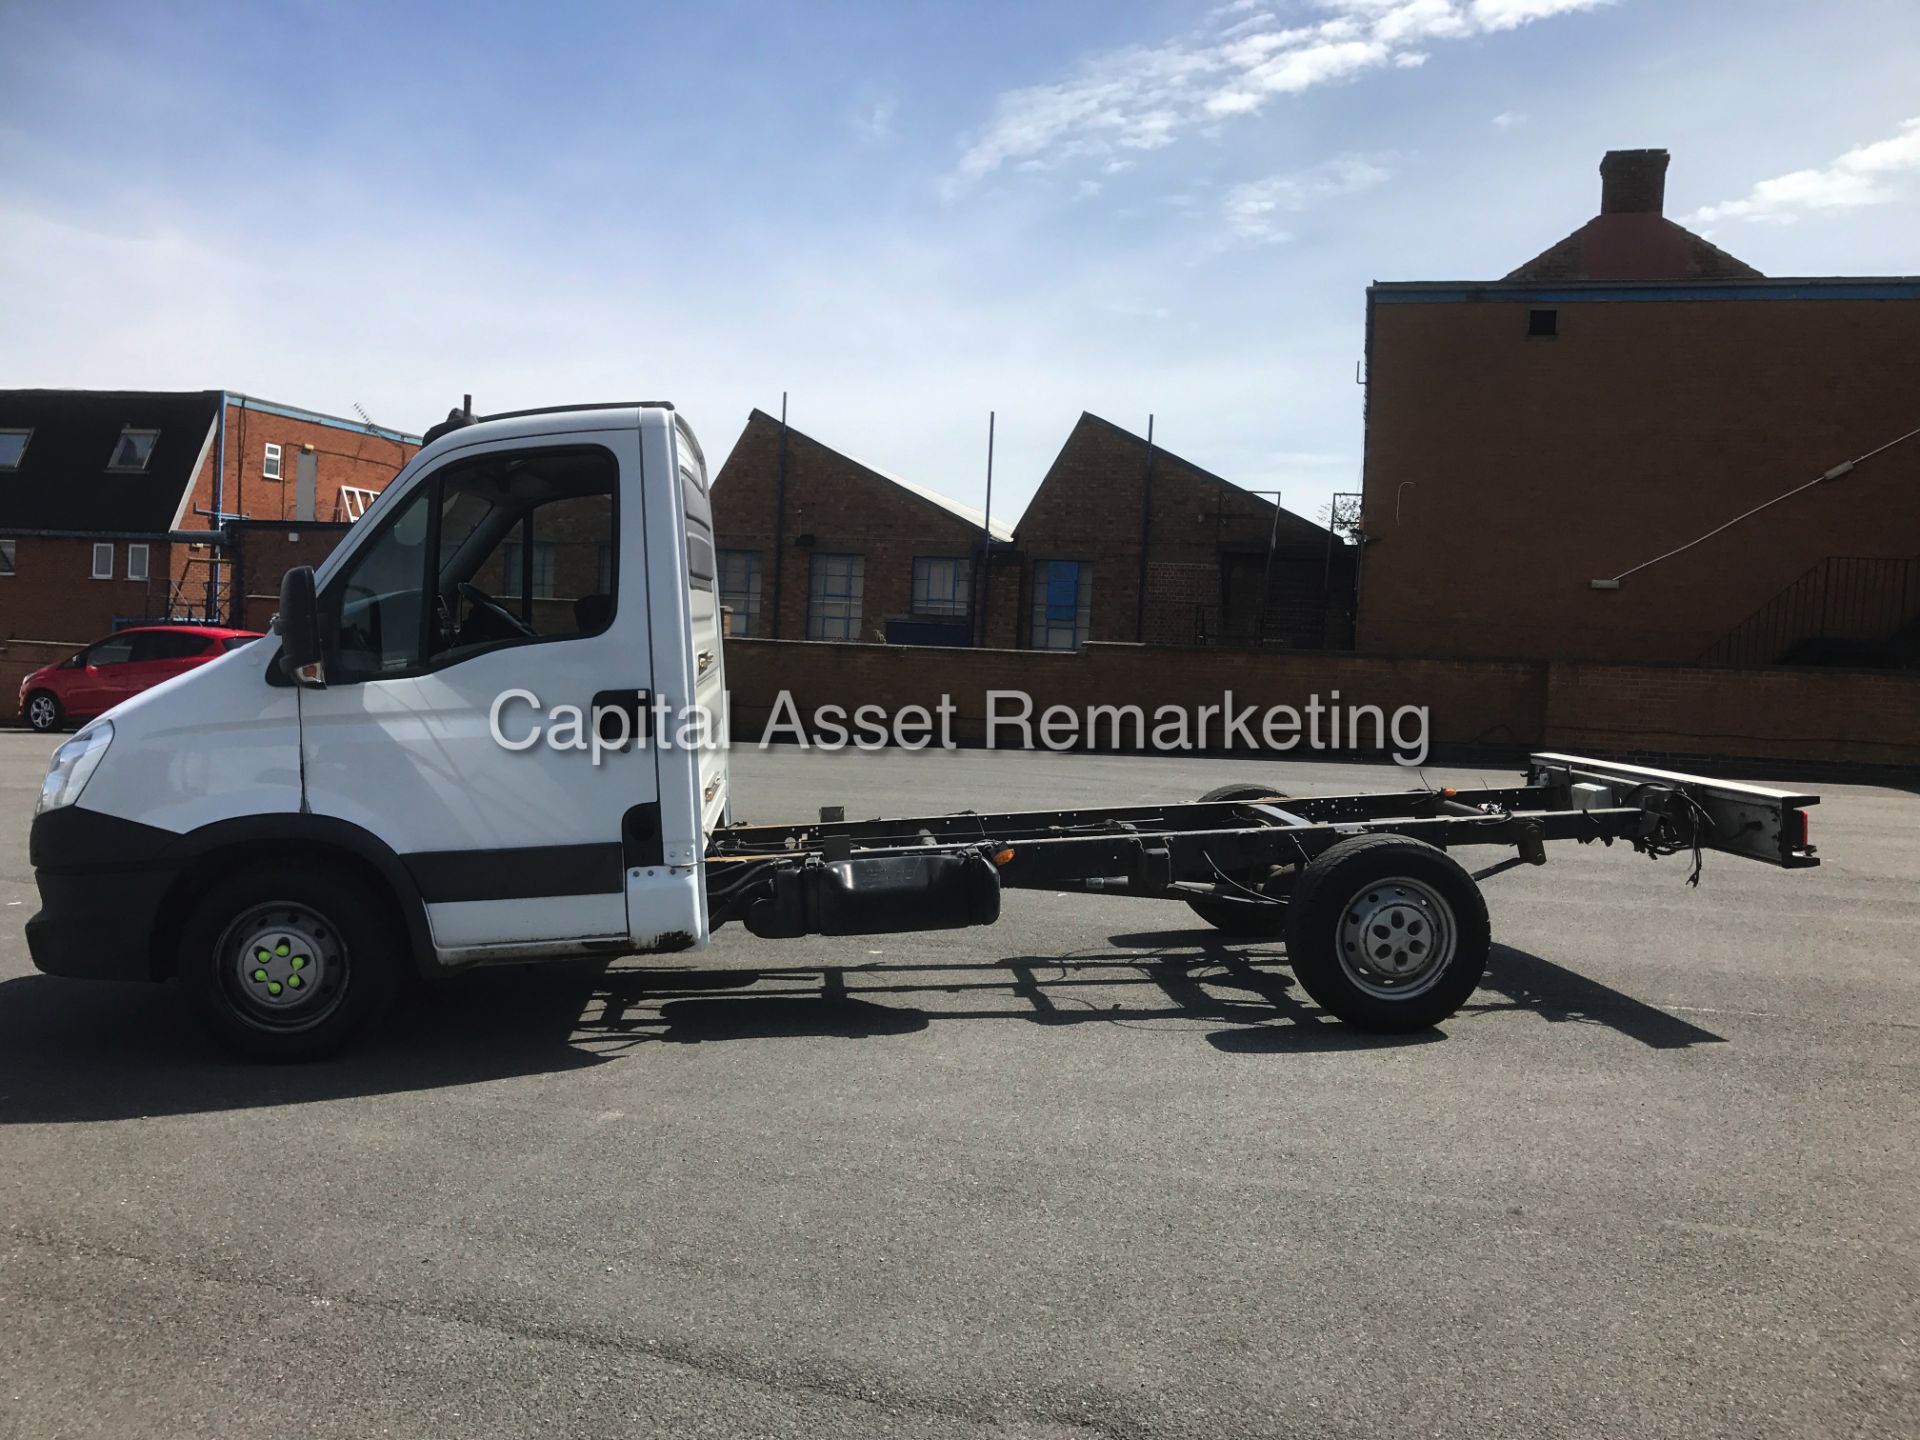 (ON SALE) IVECO DAILY 2.3D "110BHP" LWB CHASSIS (2013) 1 OWNER-IDEAL RECOVERY/TRANSPORTER CONVERSION - Image 4 of 13